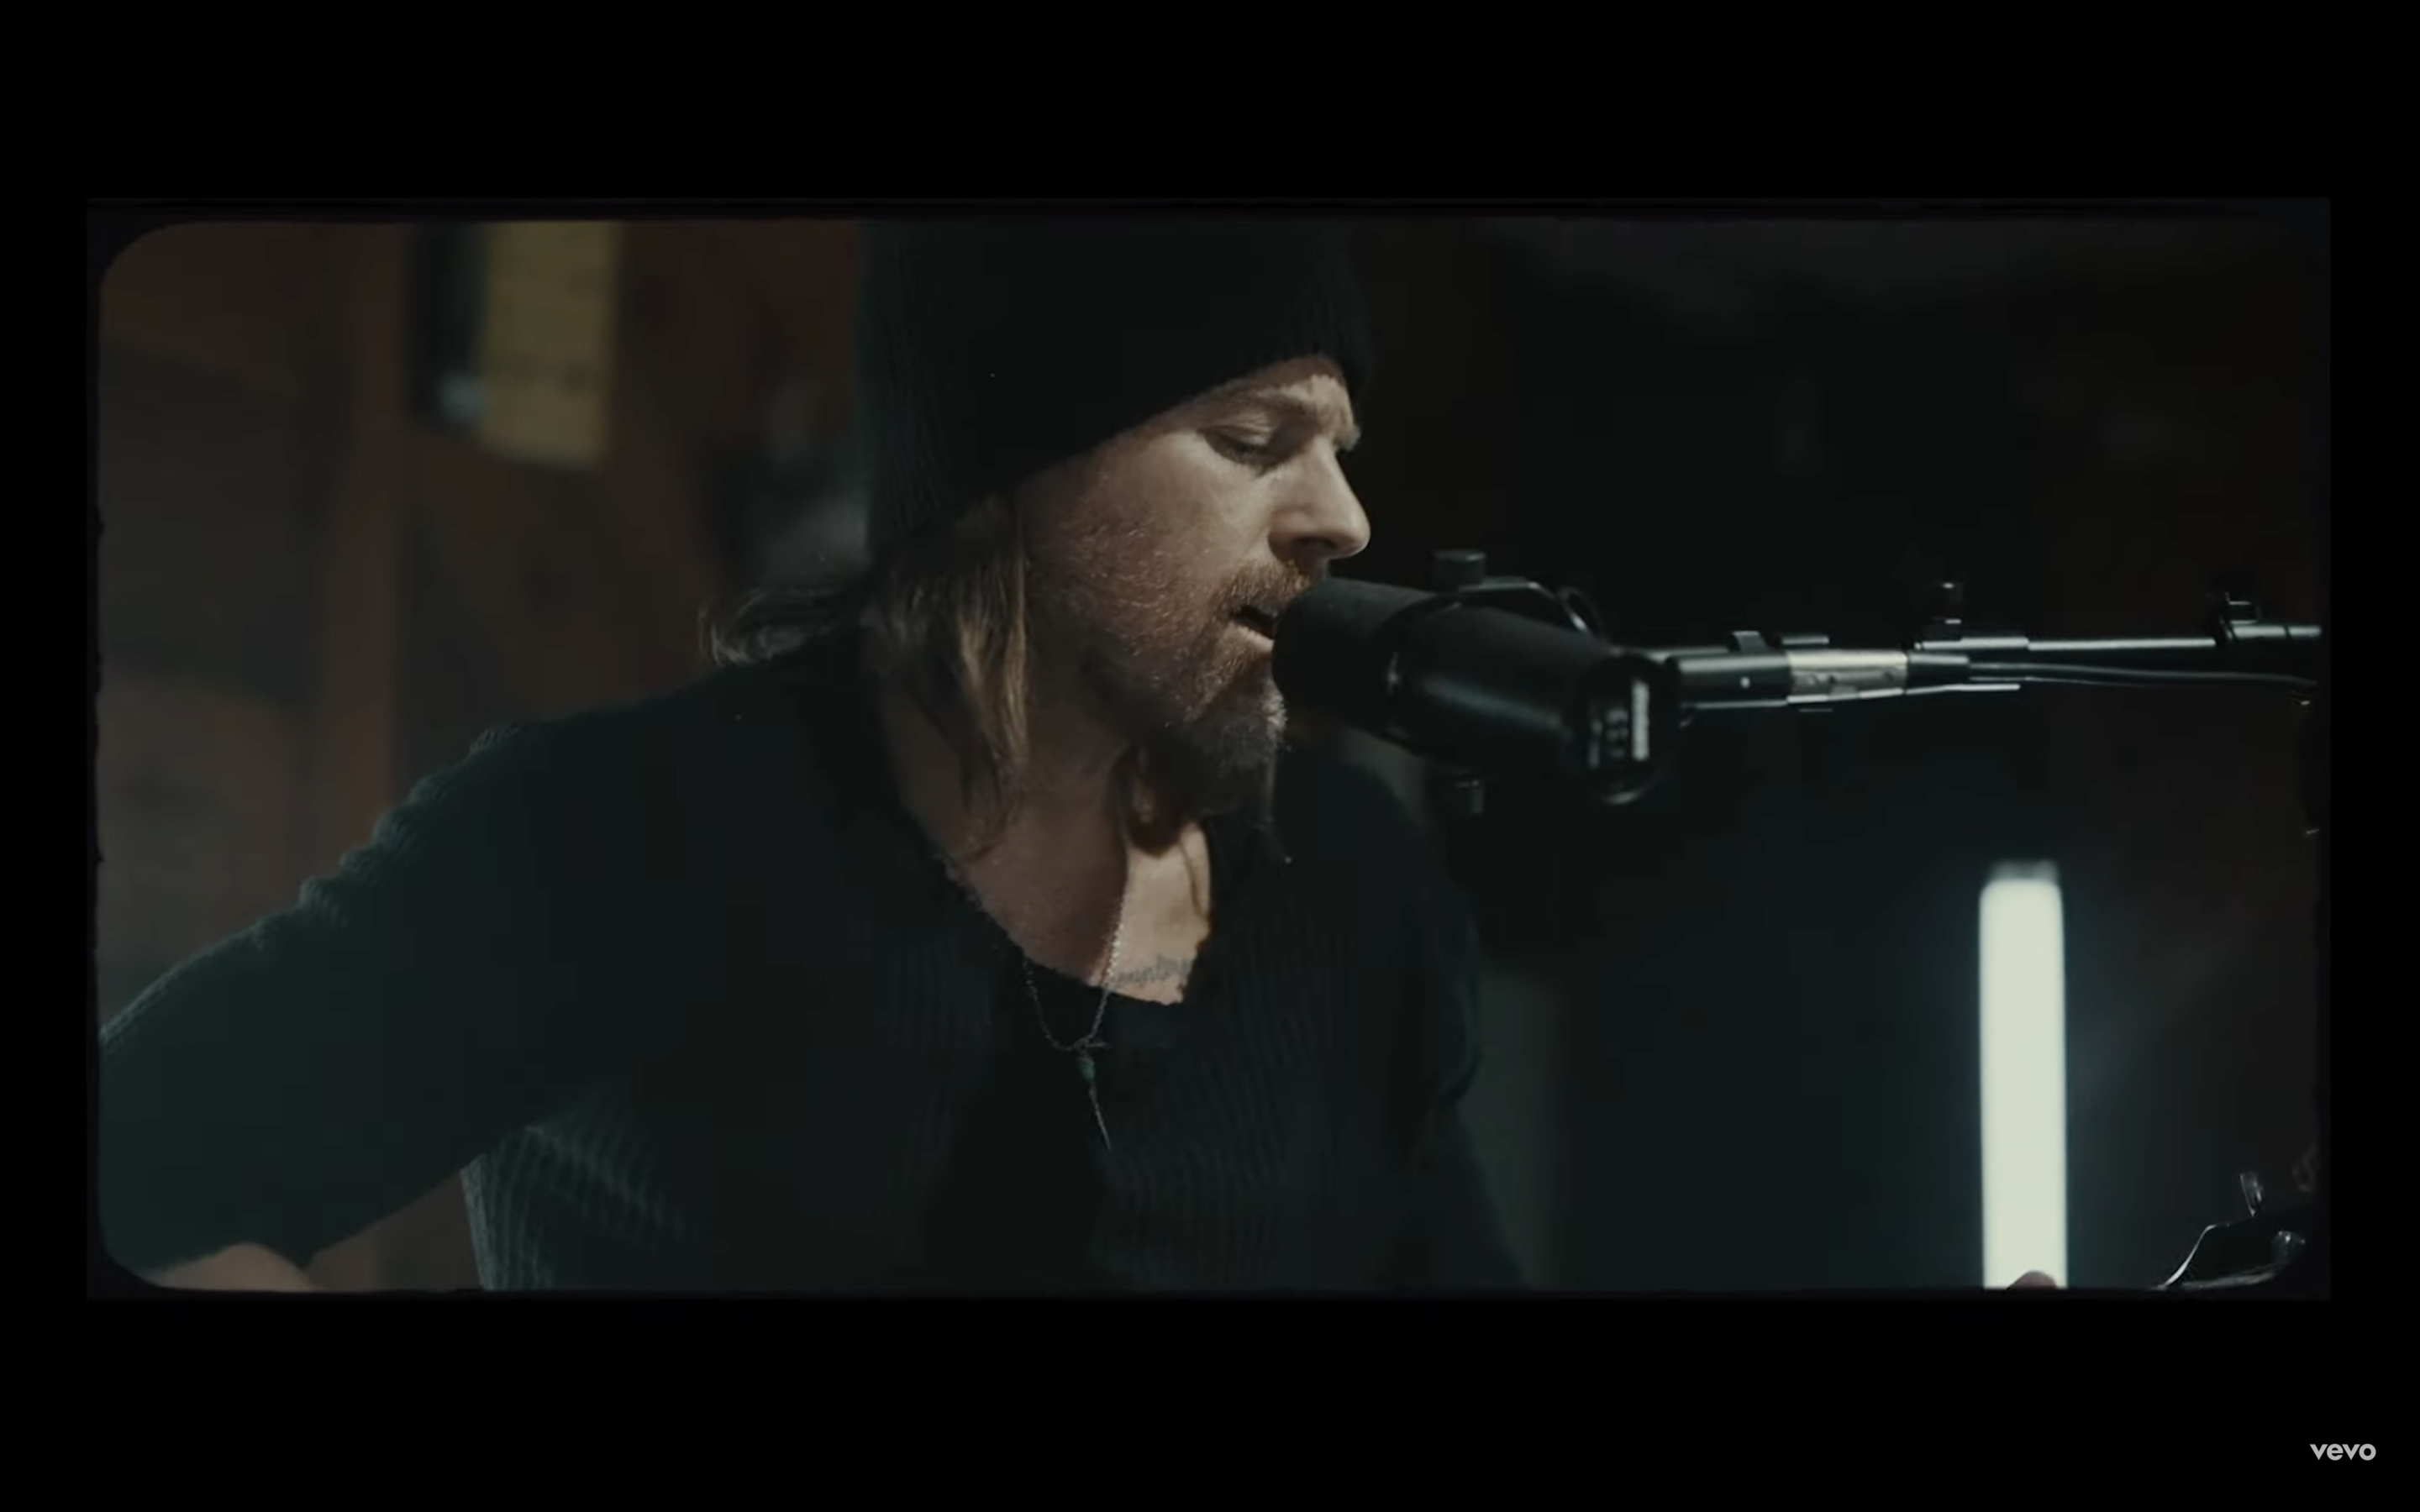 WATCH: Crazy One More Time by Kip Moore